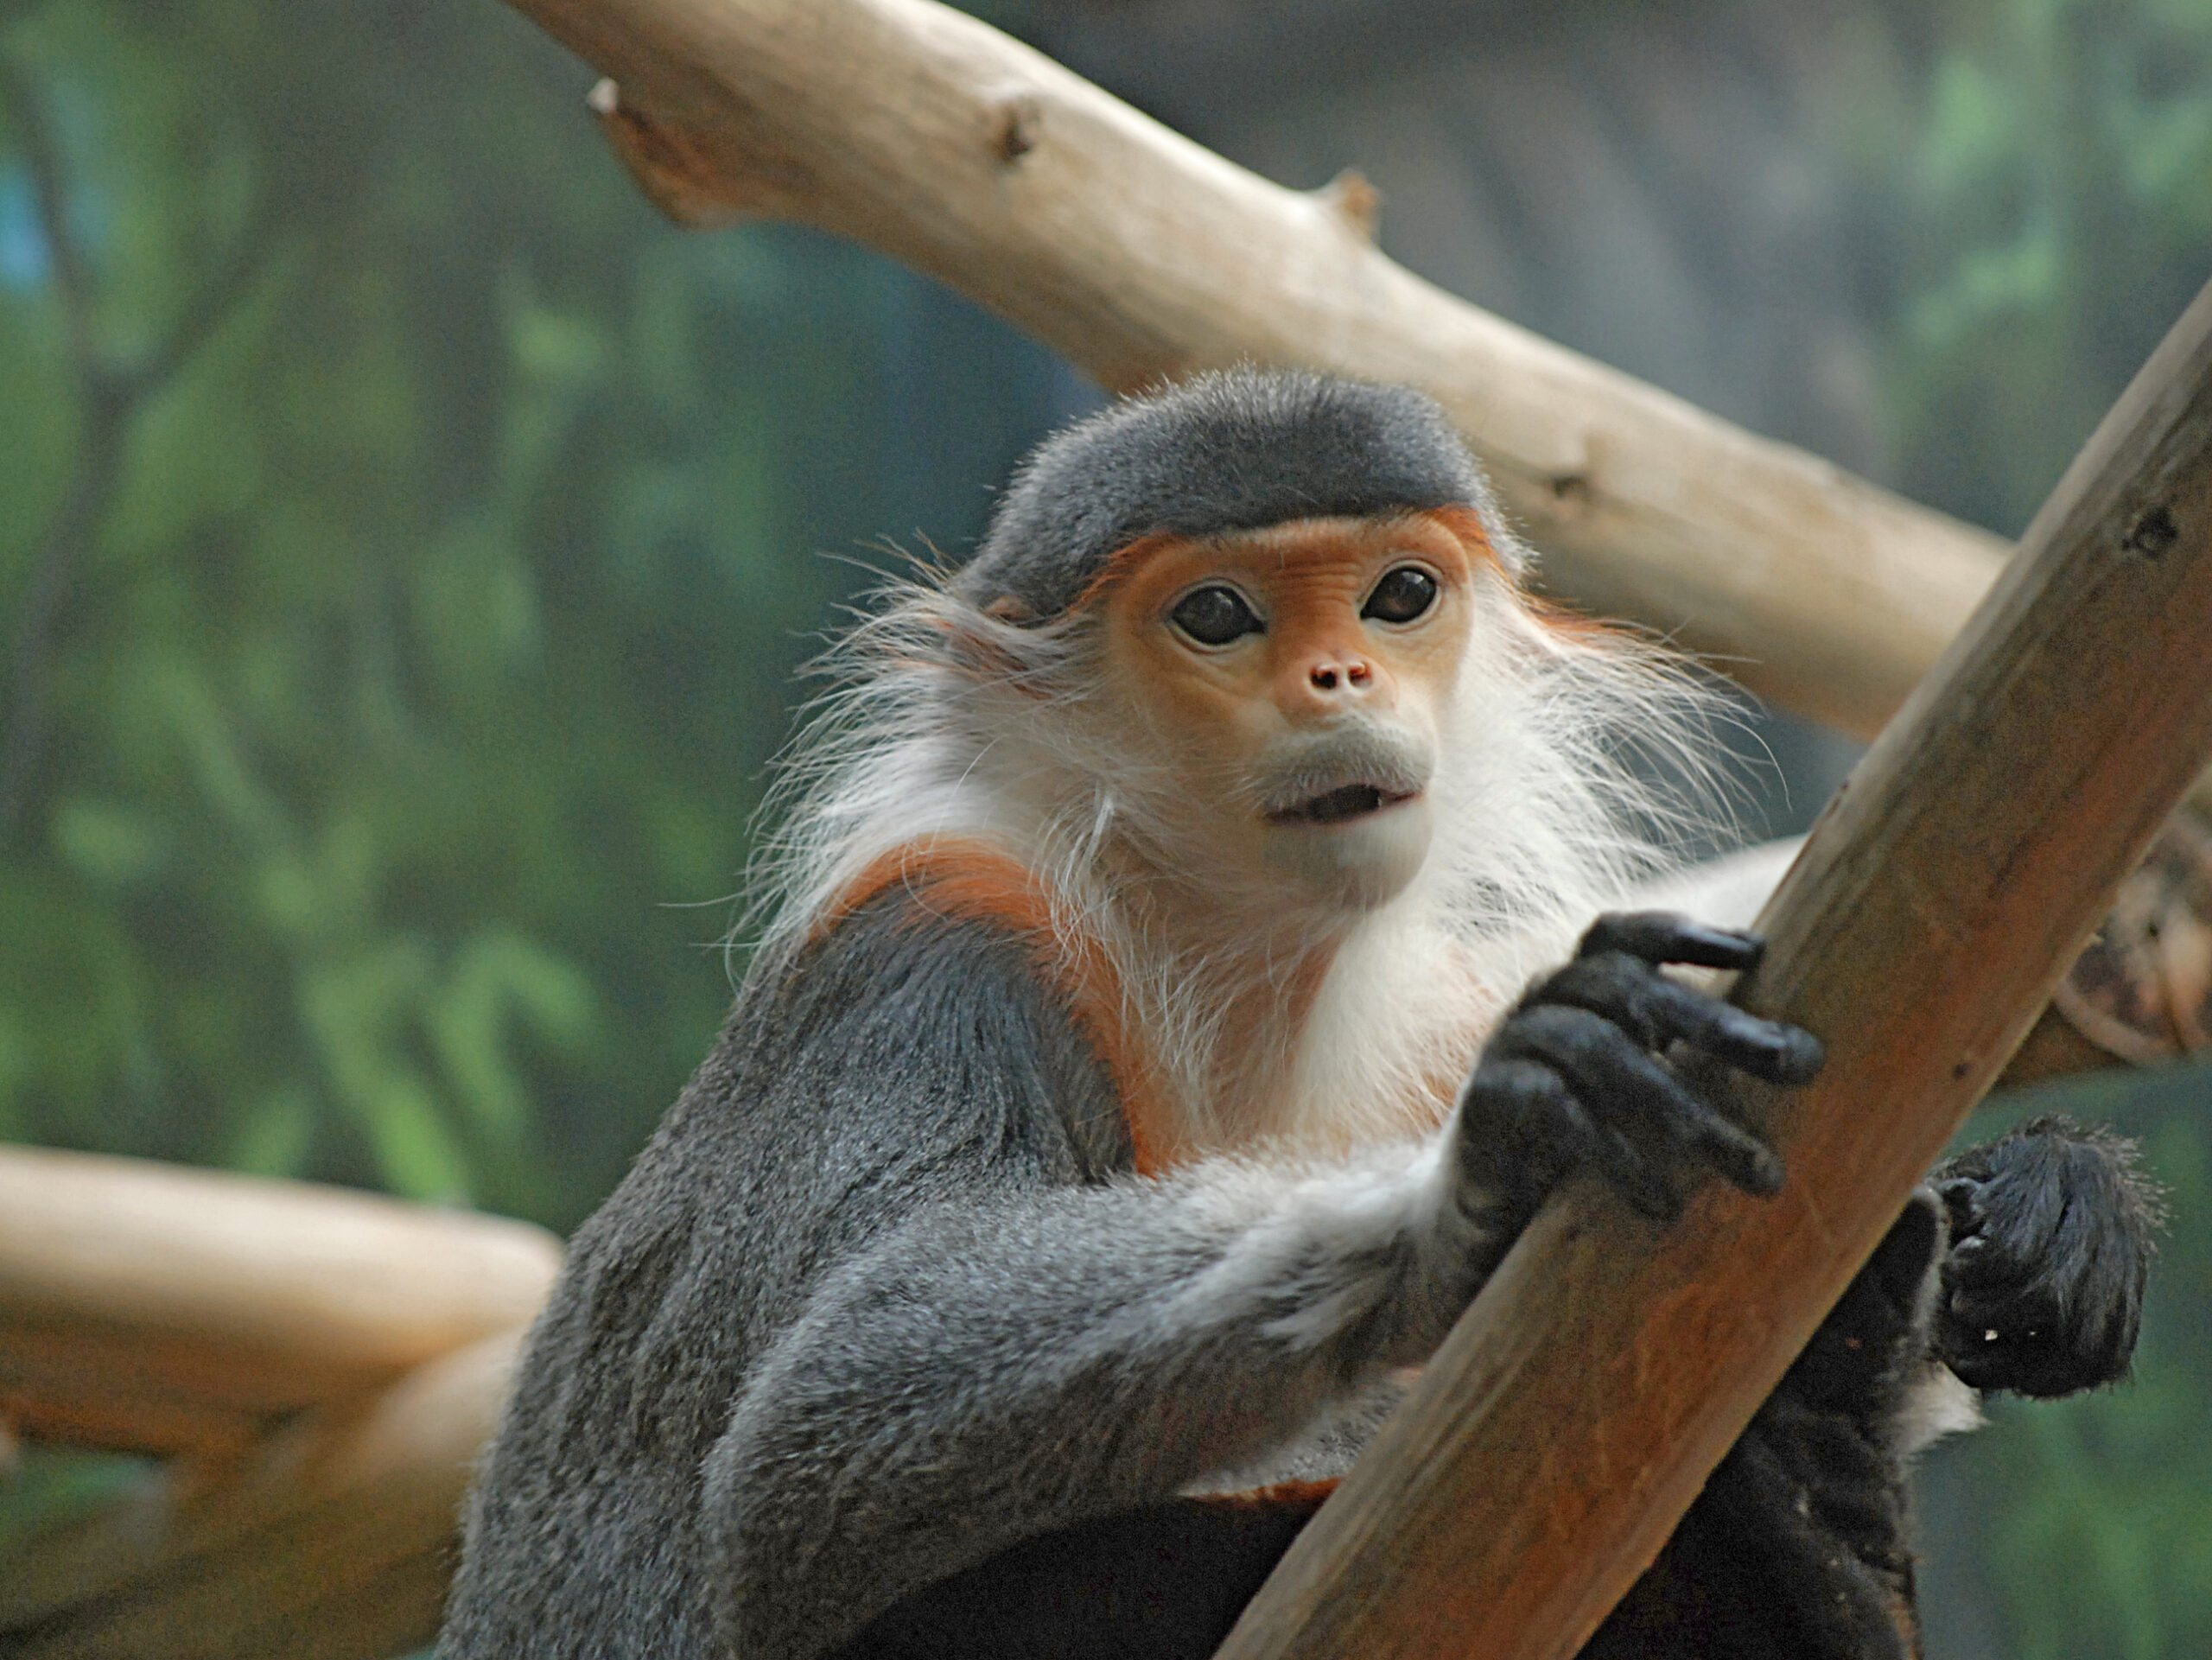 Zoo Monkeys Have Human Bacteria In Their Guts